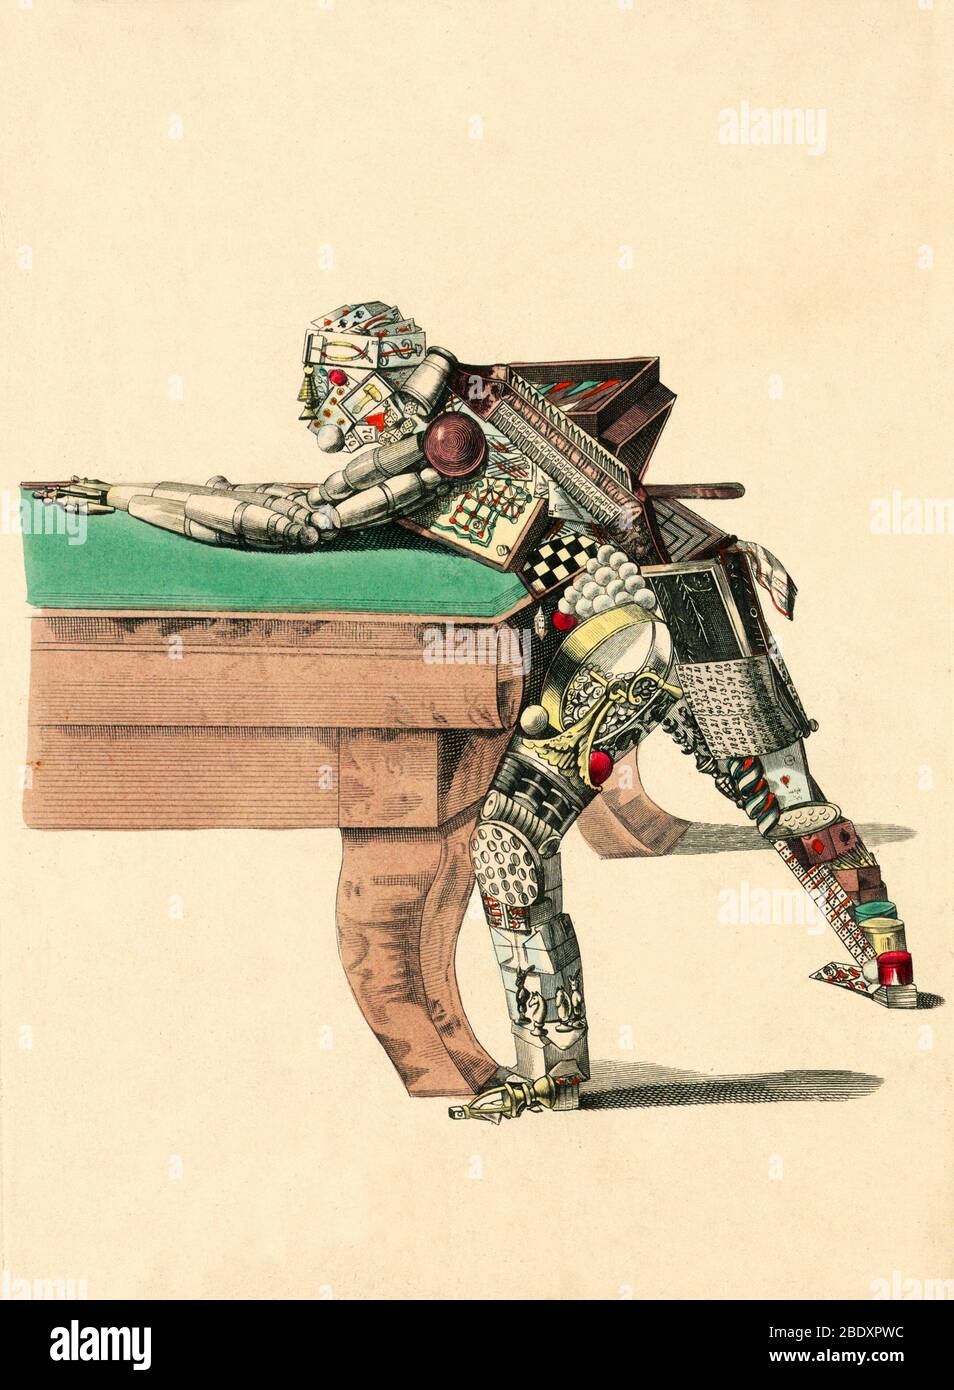 Man Composed of All Known Games, c. 1850 Stock Photo